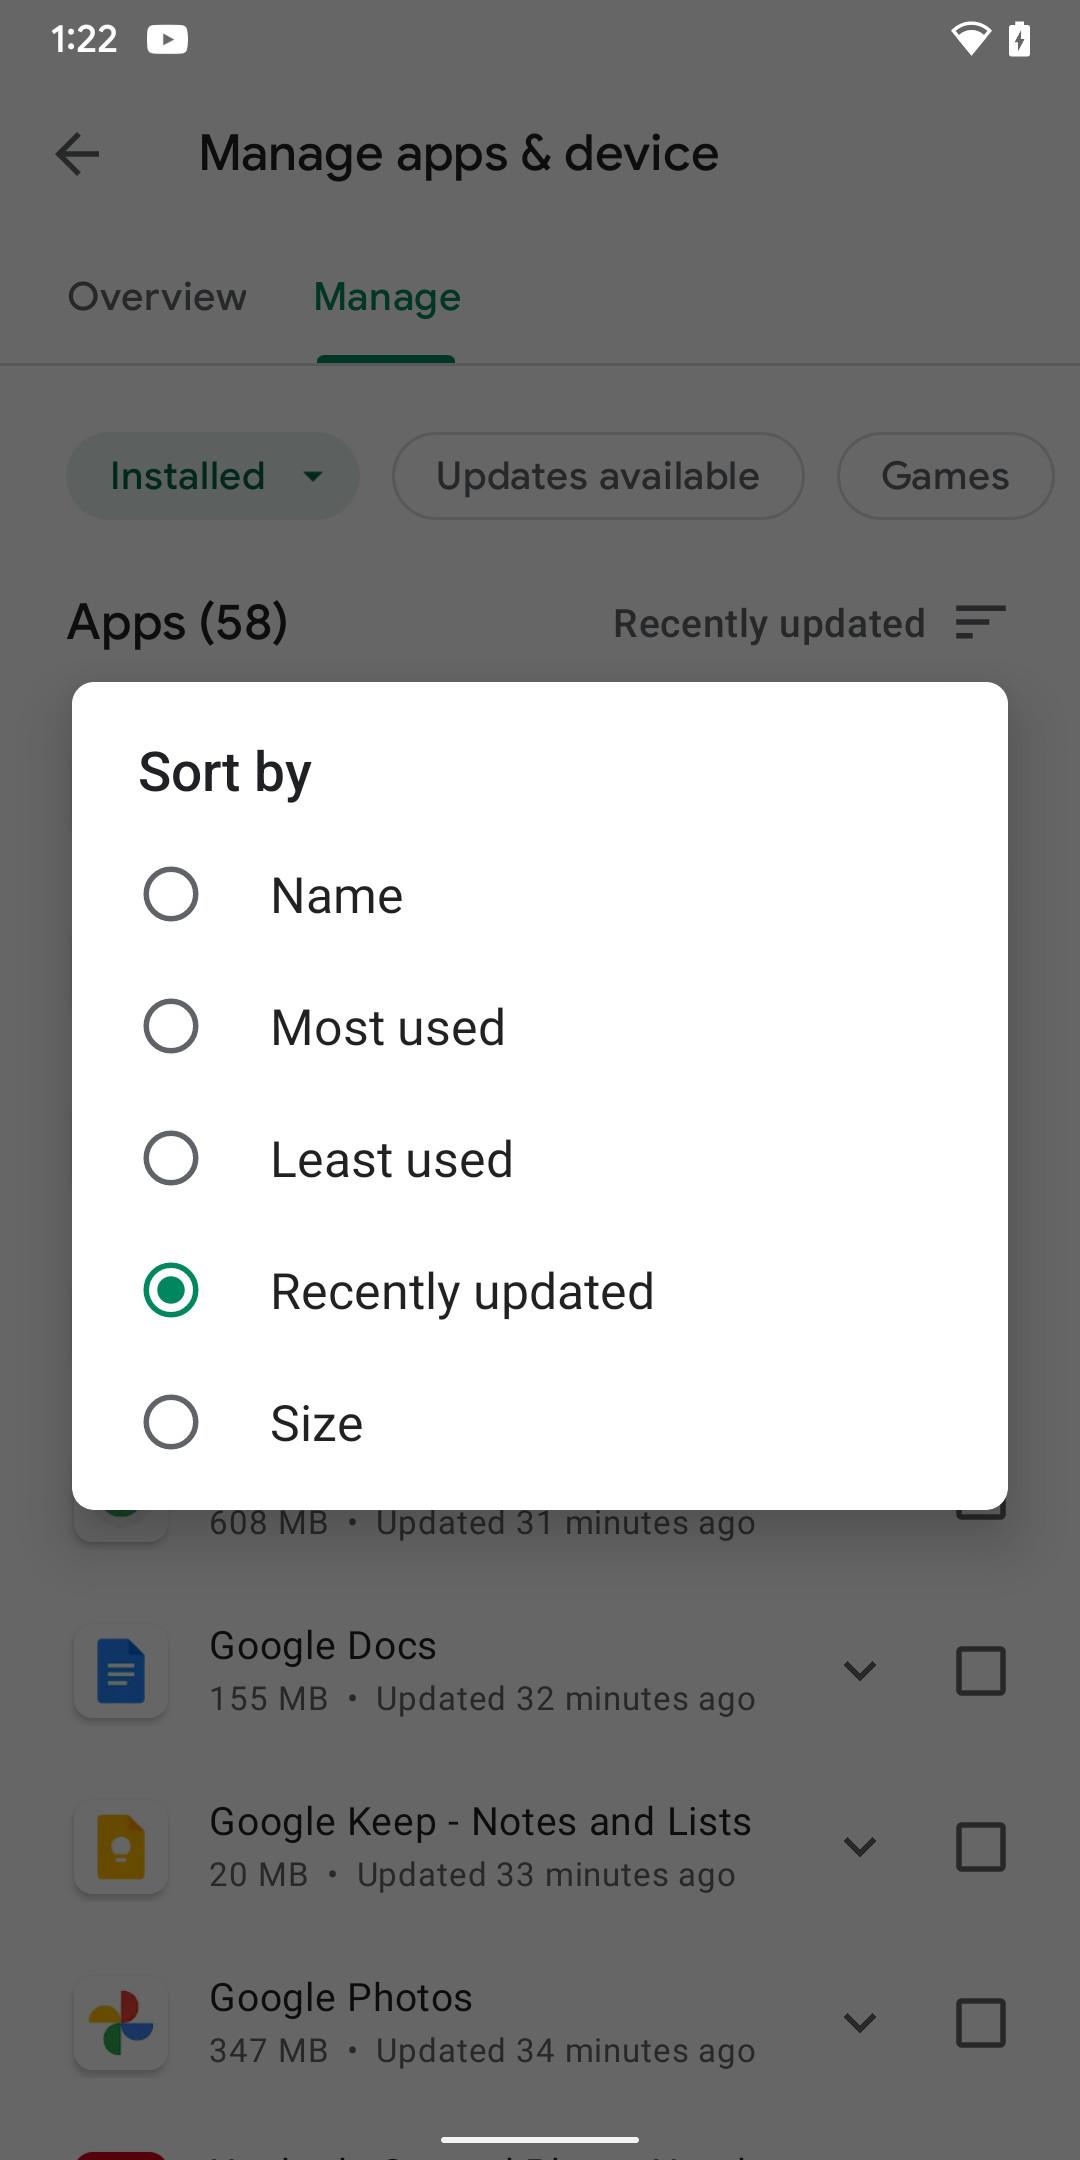 You can sort your app list in a variety of ways to check which can be removed.